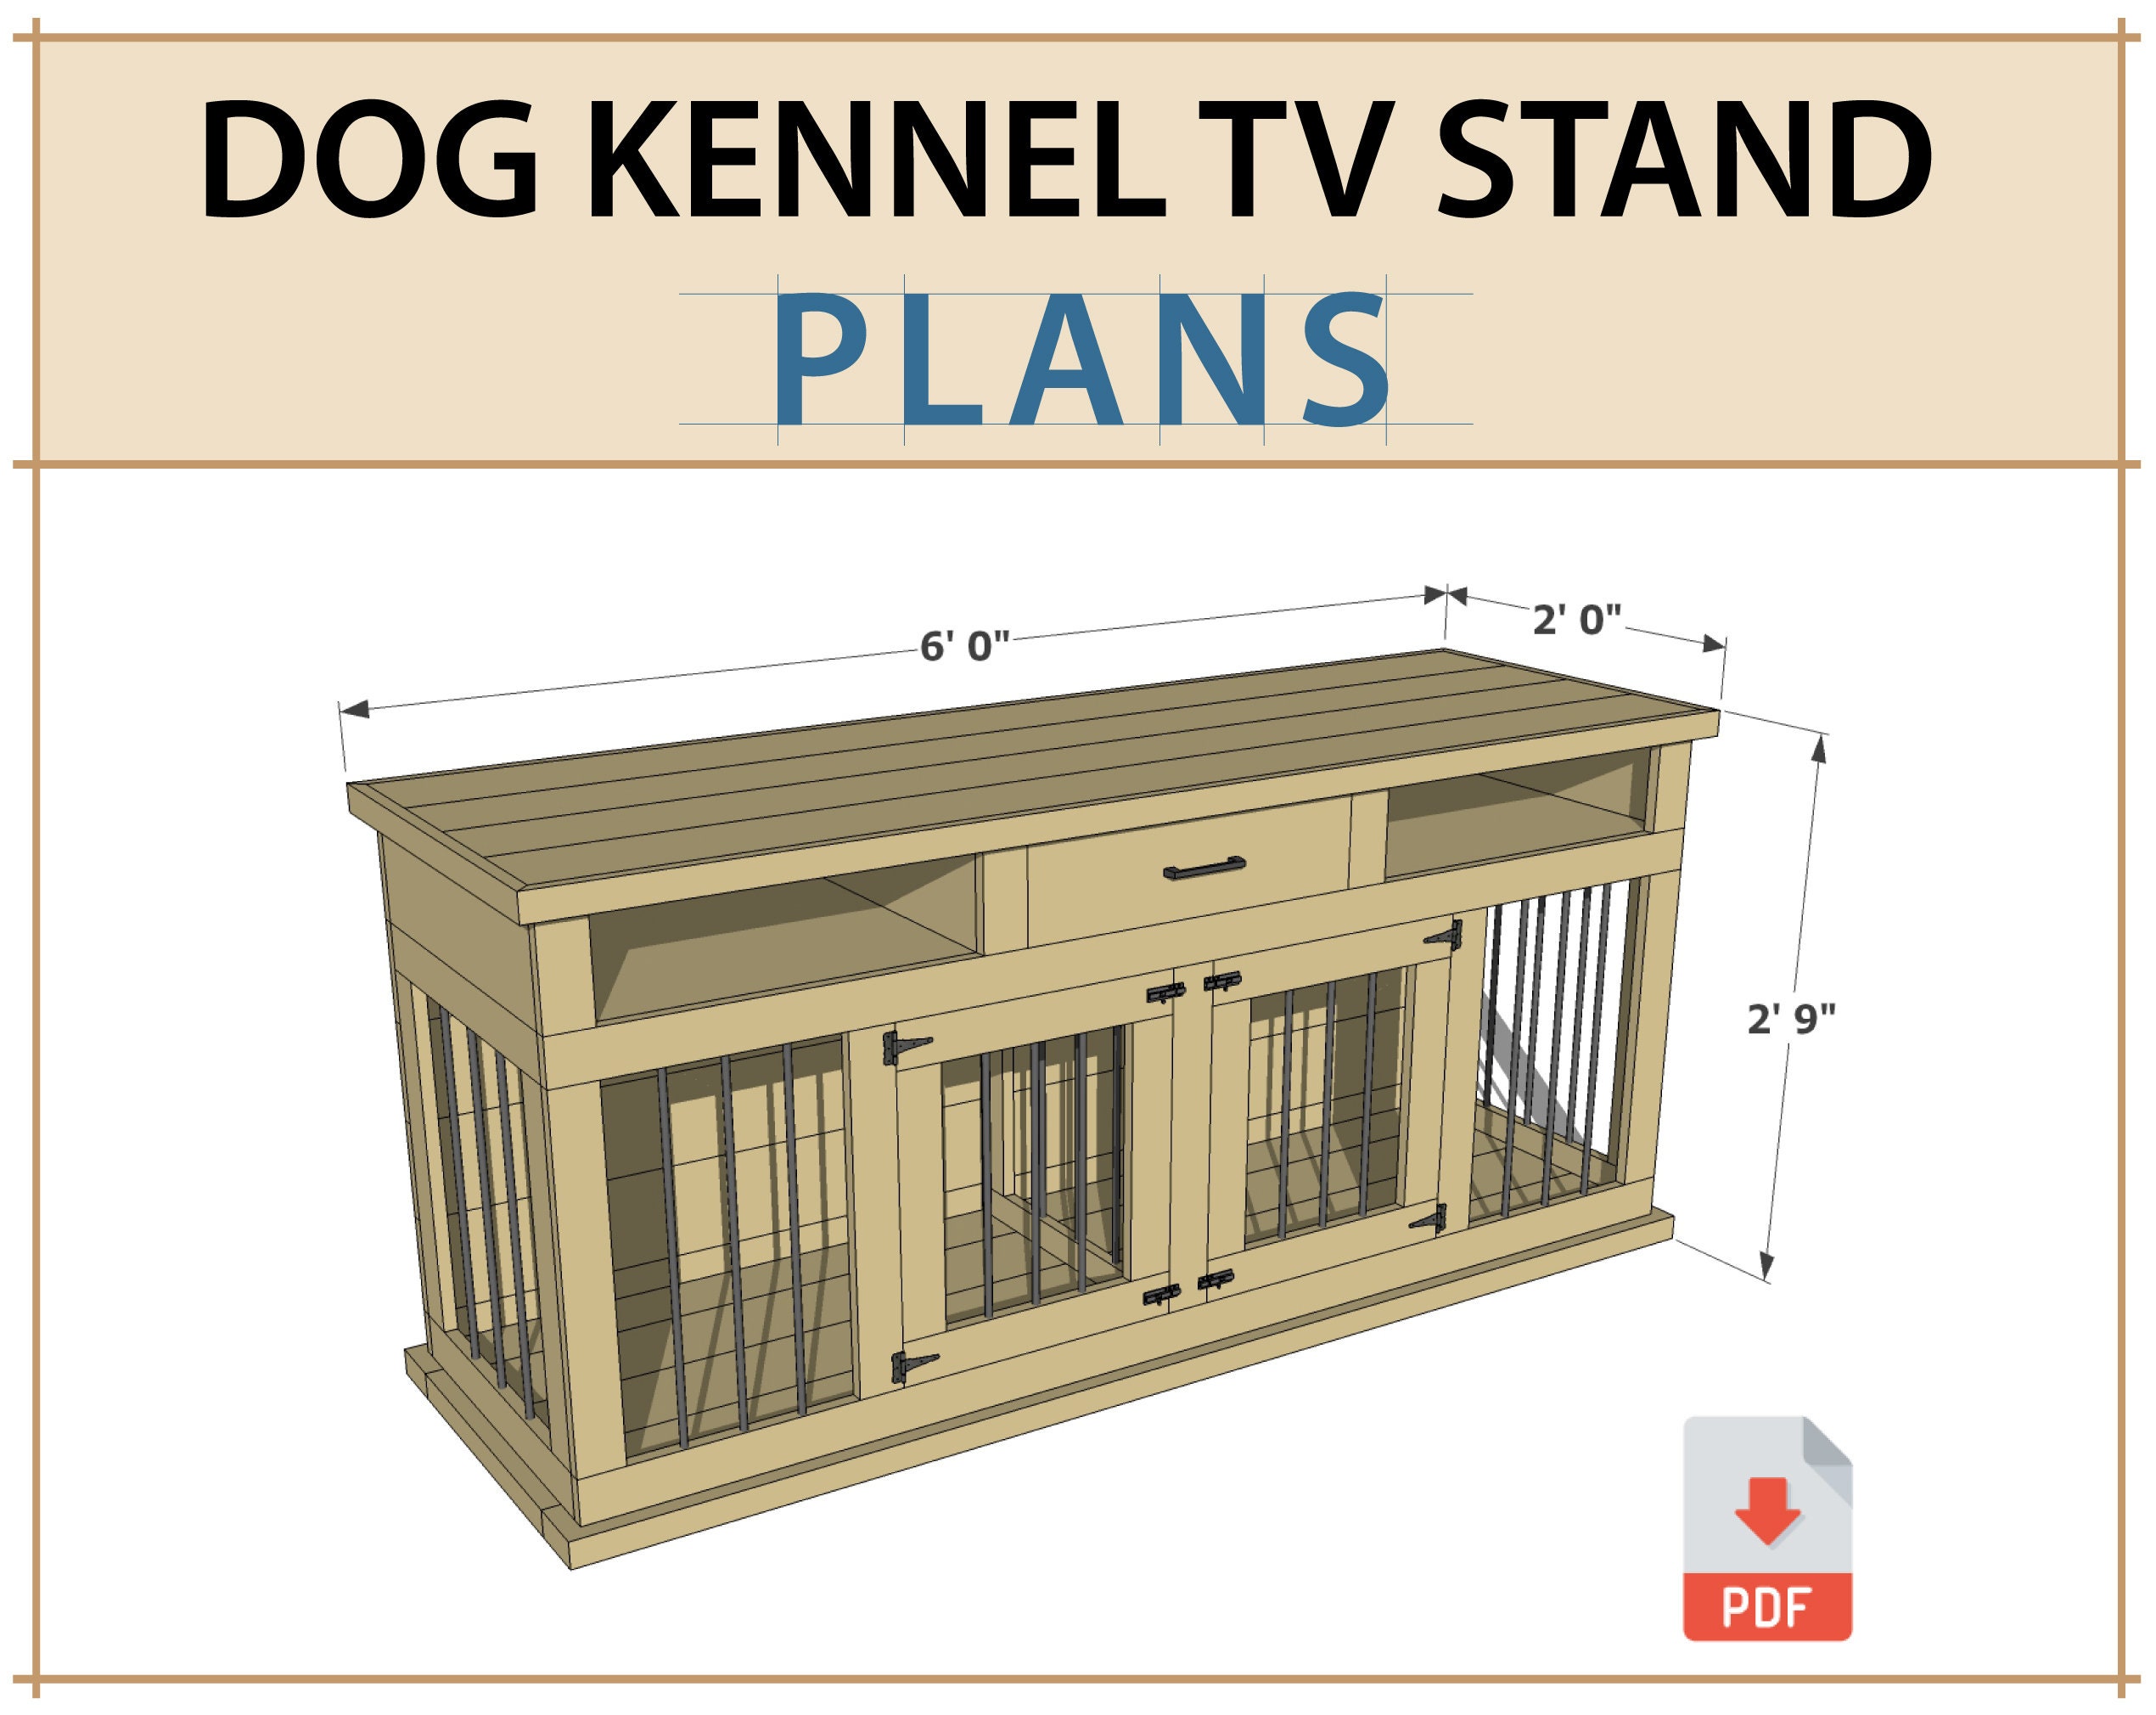 DIY Plans Double Kennel TV Wooden Dog Crate - Etsy